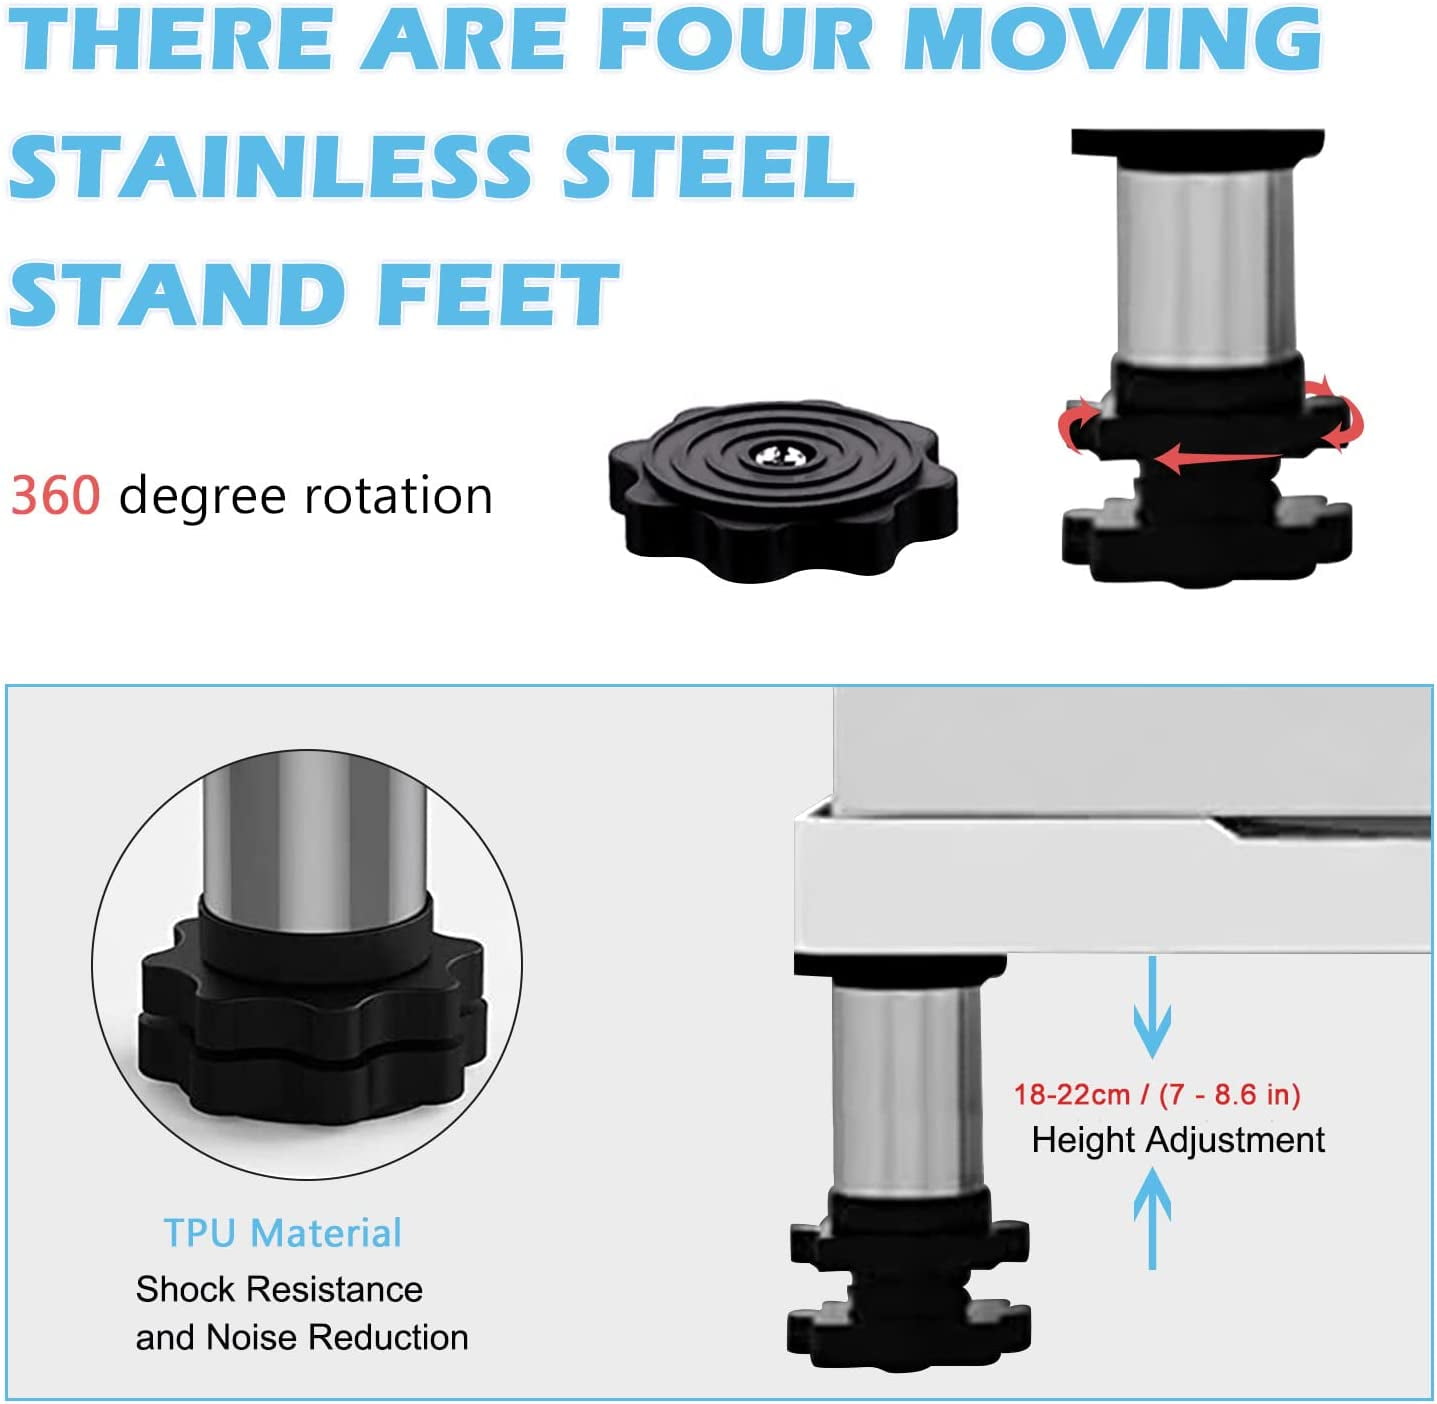 Mini Fridge Riser, Maximum Load of 660 Lbs (300 Kg),Shock-Absorbing and  Silent, Portable Dryer Stand, for Dryers and Refrigerators,4Feets4Wheels